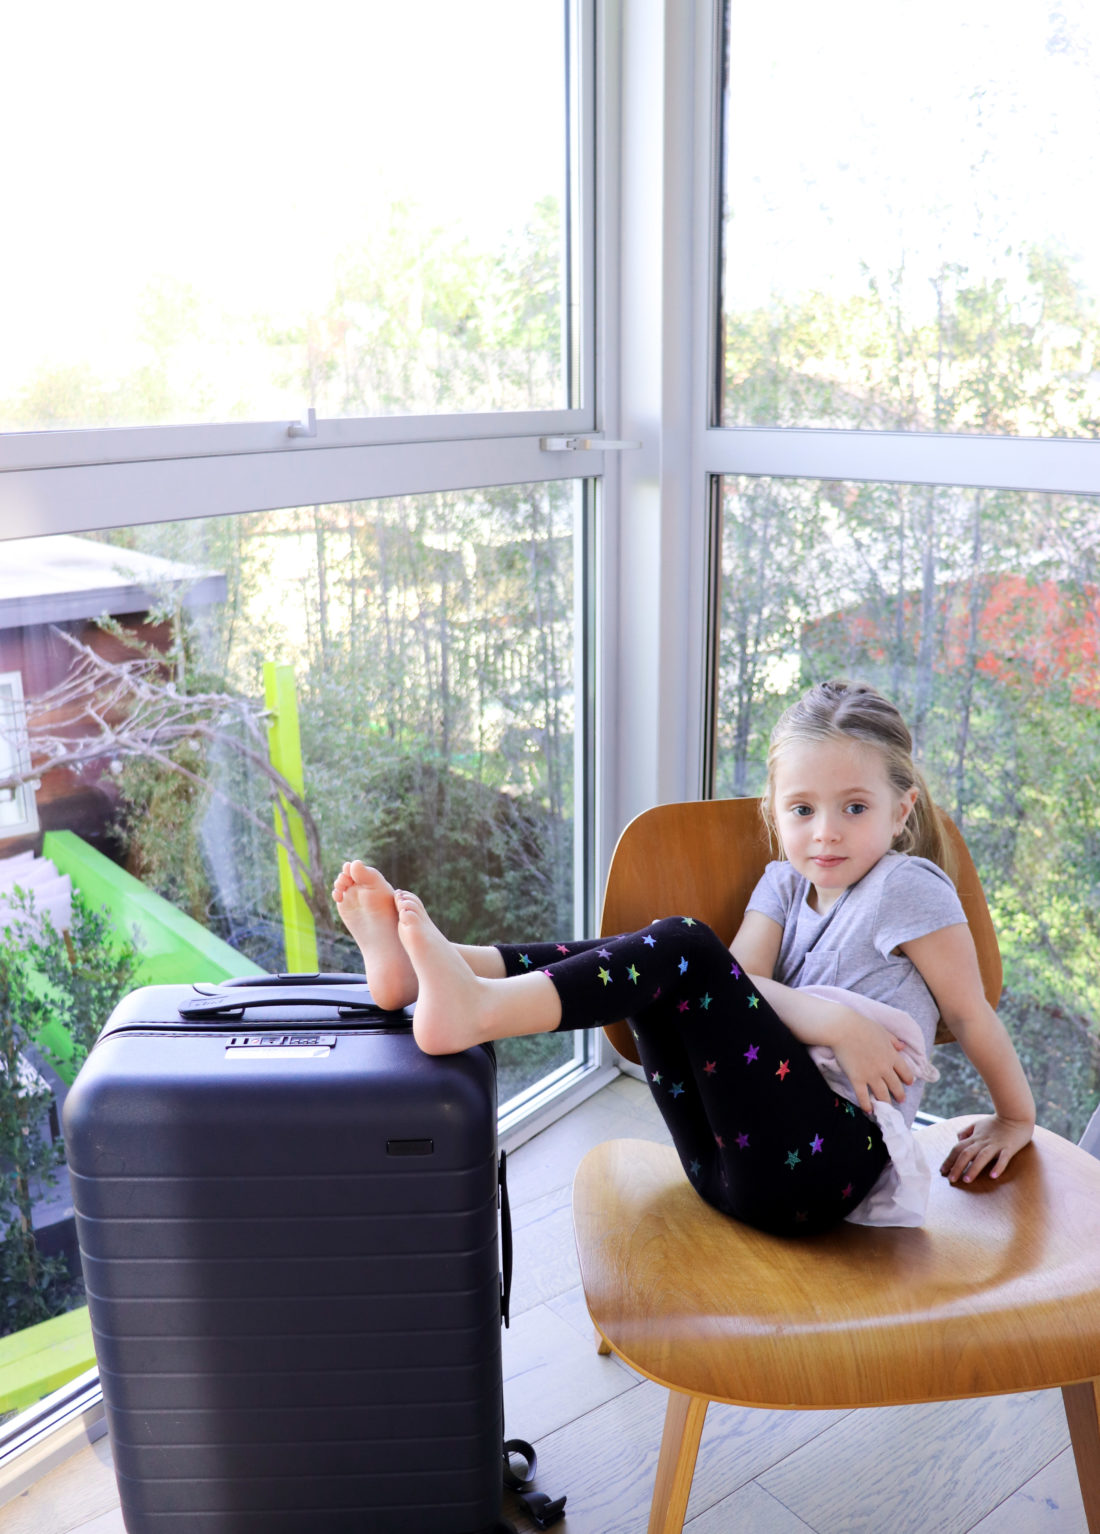 Marlowe Martino sits on a chair and rests her feet on a carry-on suitcase as part of a blog post about the best toddler travel tips